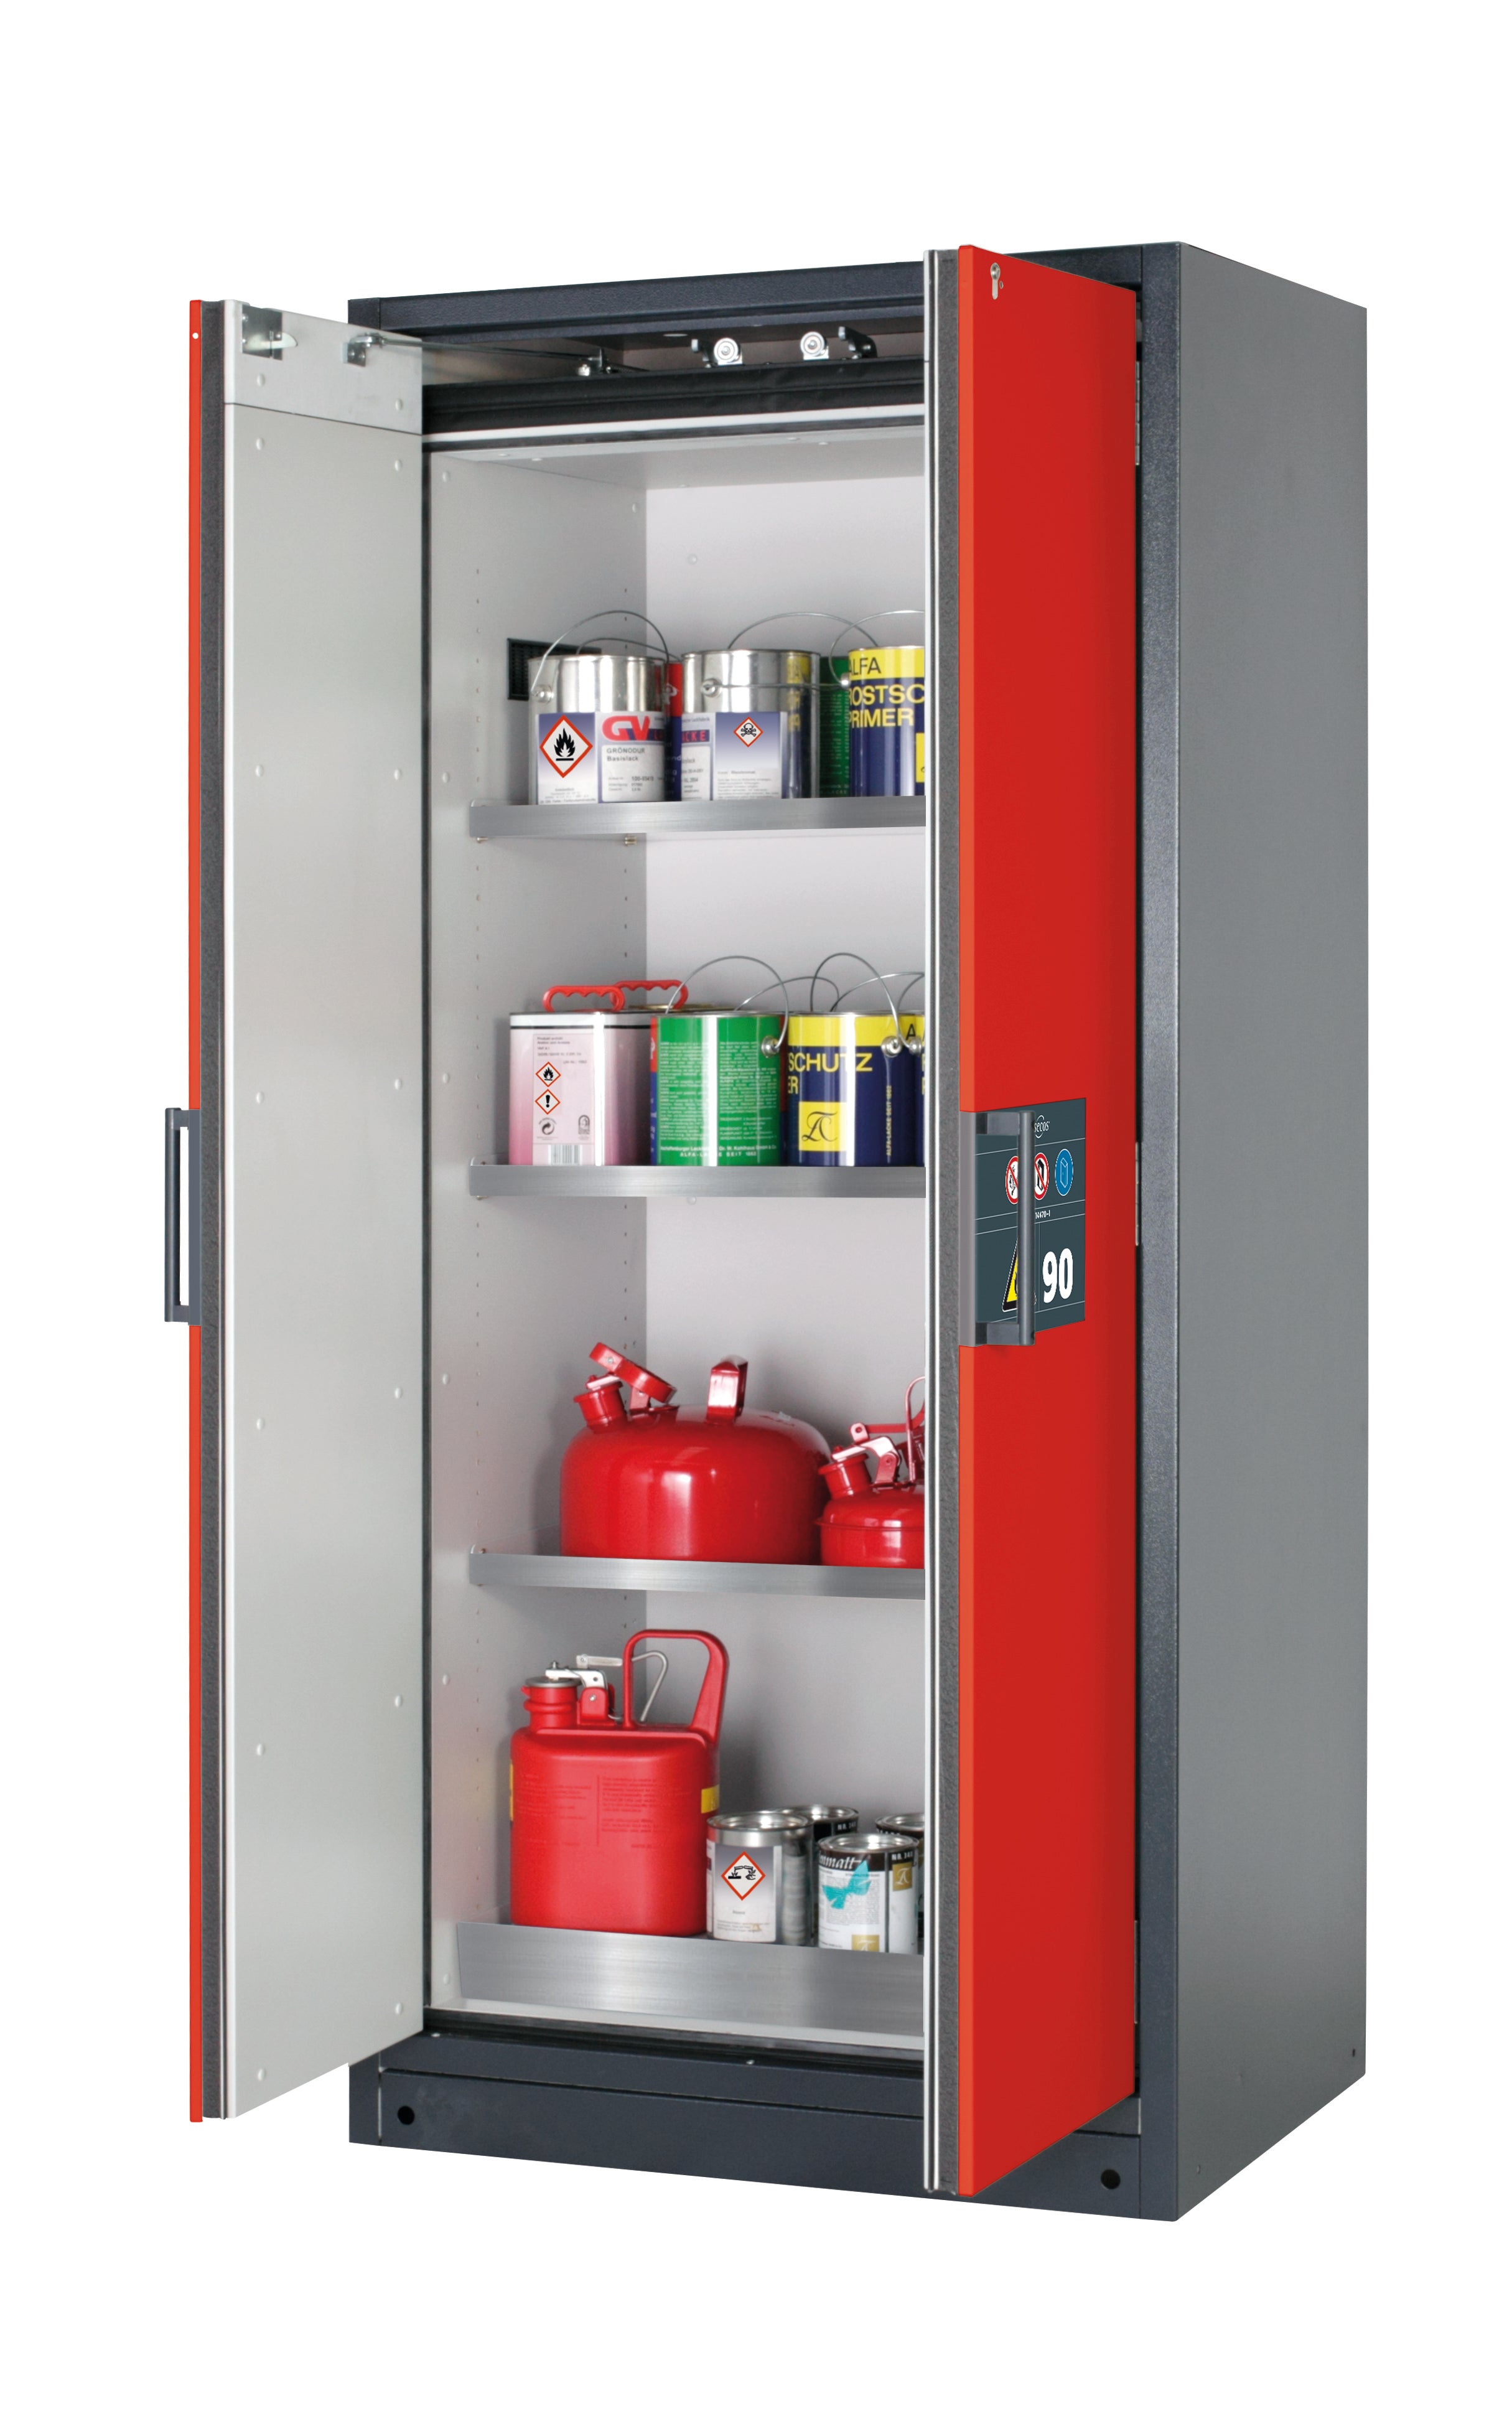 Type 90 safety storage cabinet Q-CLASSIC-90 model Q90.195.090 in traffic red RAL 3020 with 3x shelf standard (stainless steel 1.4301),